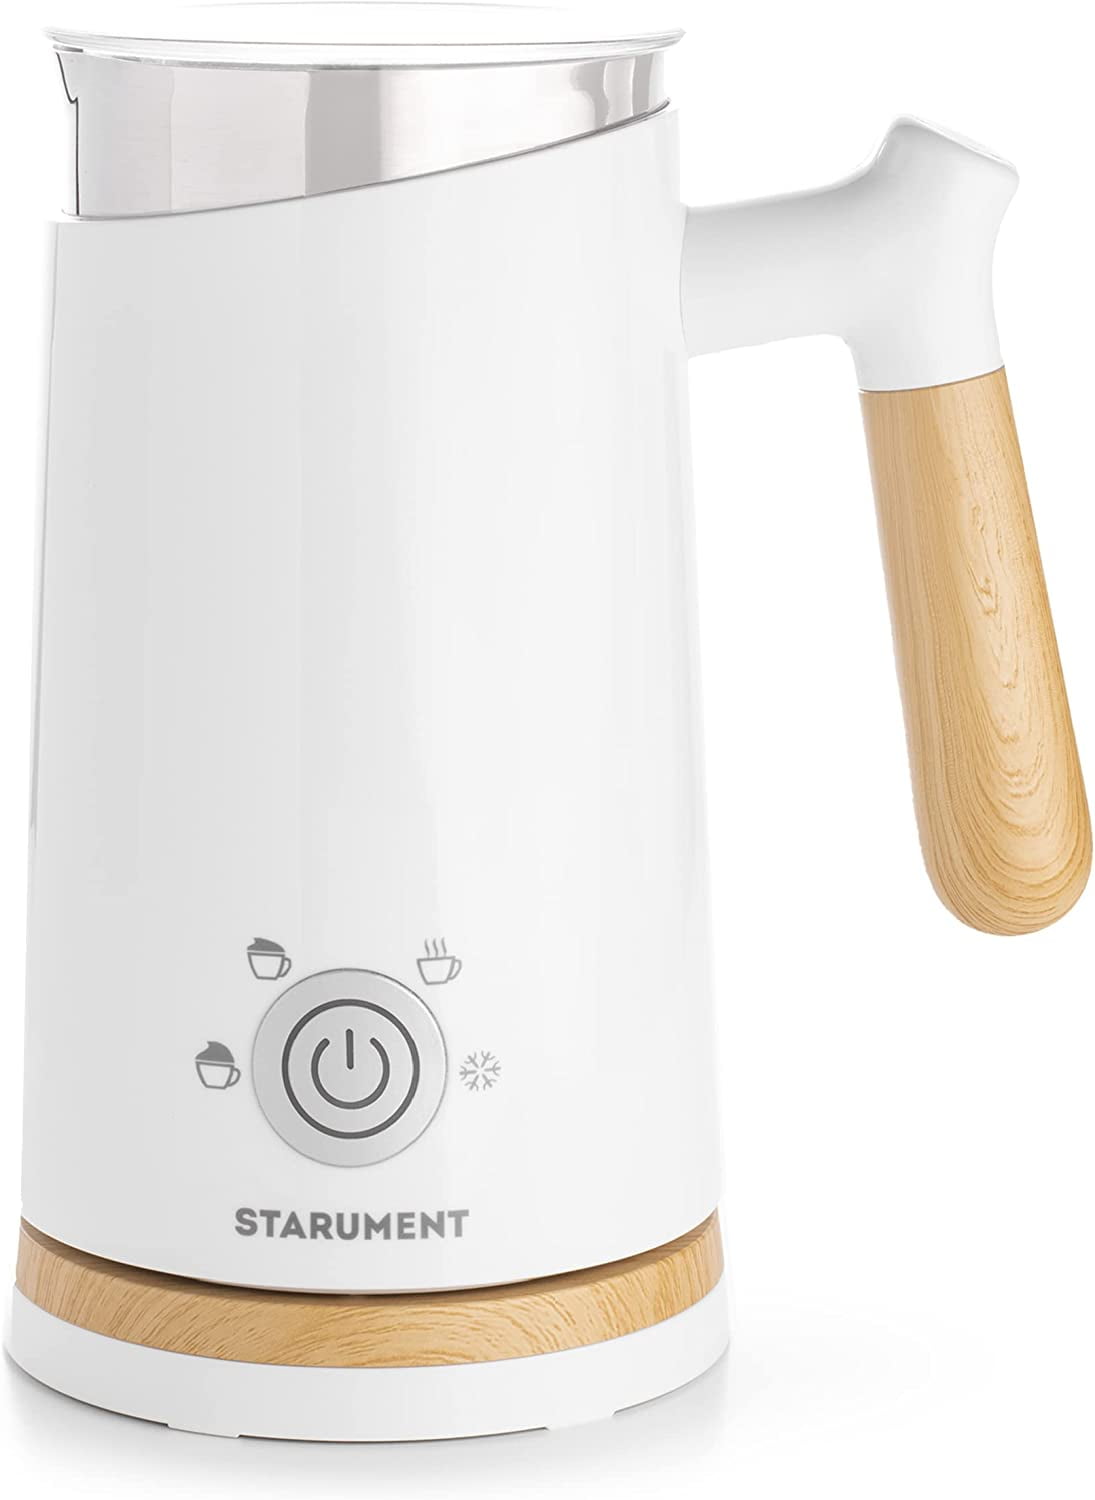 Elemore Home Milk Frother, Electric Milk Frother & Steamer for Making  Cappuccino(4.4 oz/10.1 oz) 20V, White